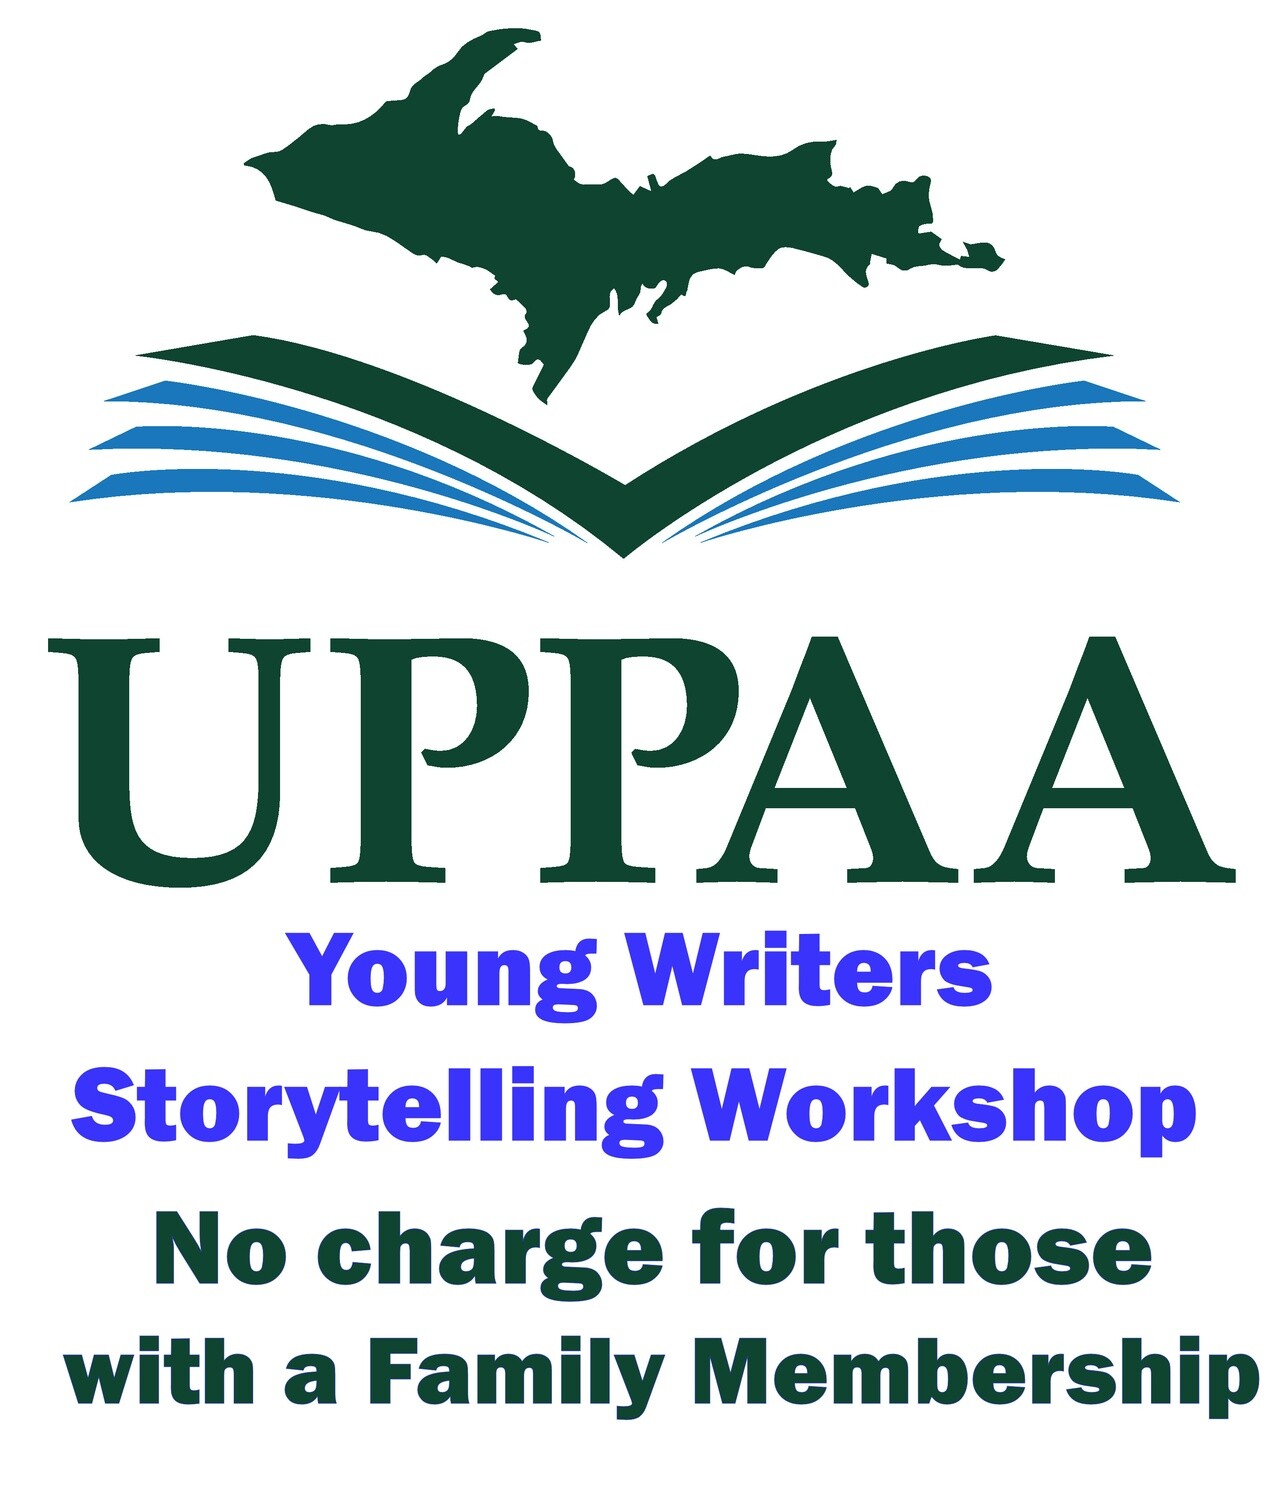 Young Writers Workshop - FREE with family membership